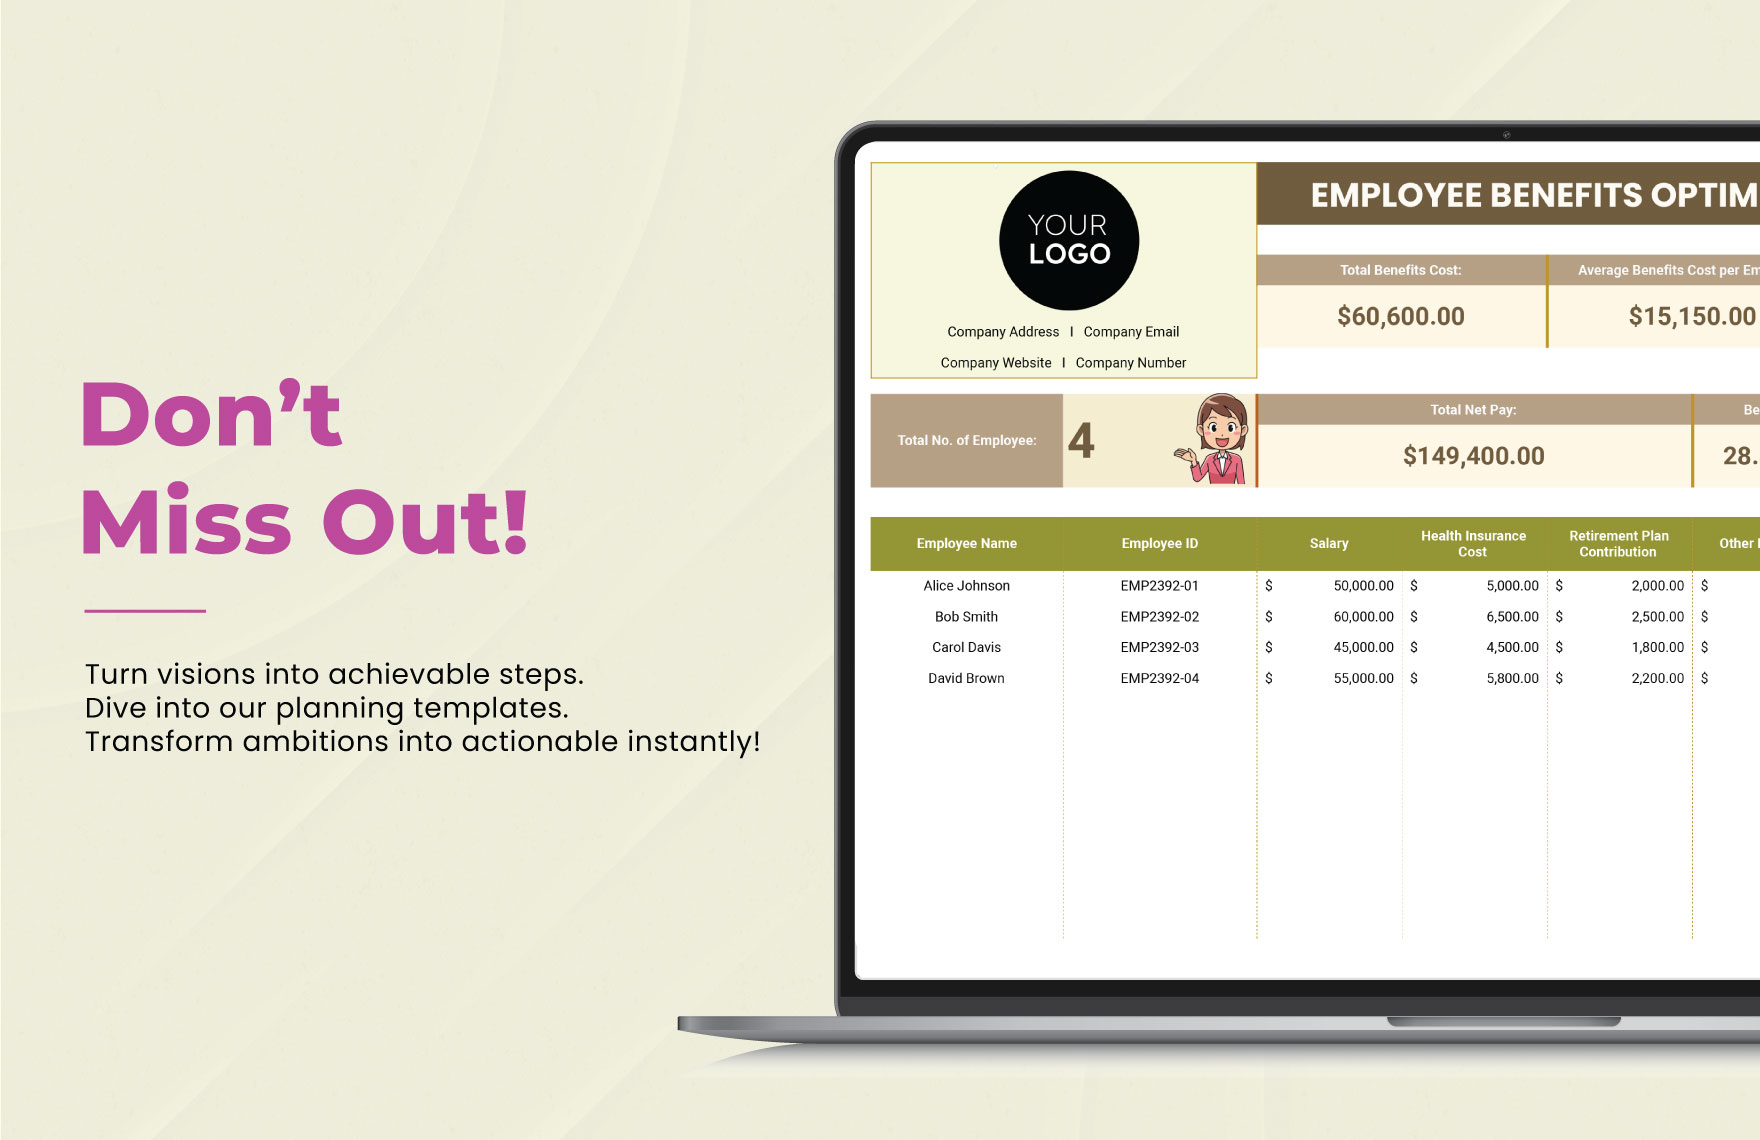 Wage and Salary Adjustment Planner HR Template